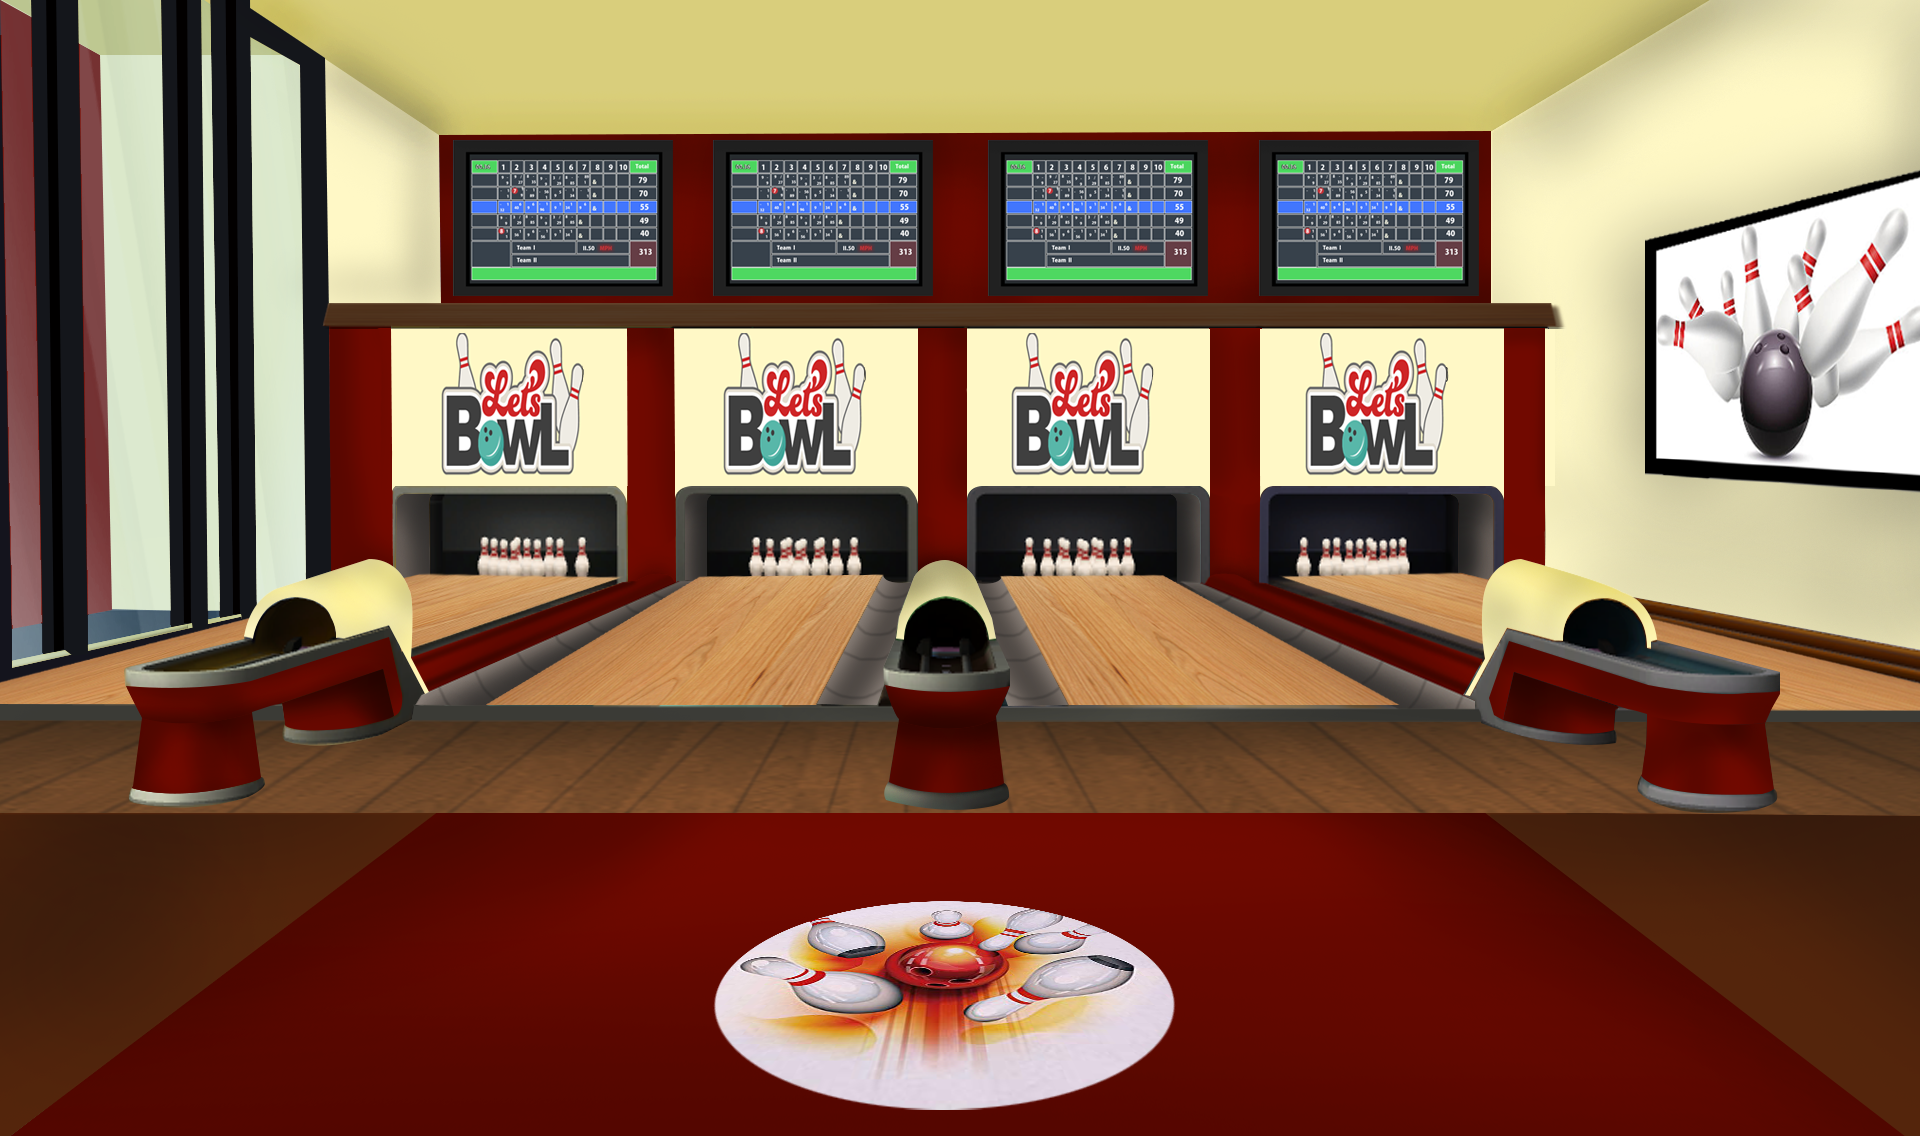 INT. BOWLING ALLEY RED – DAY